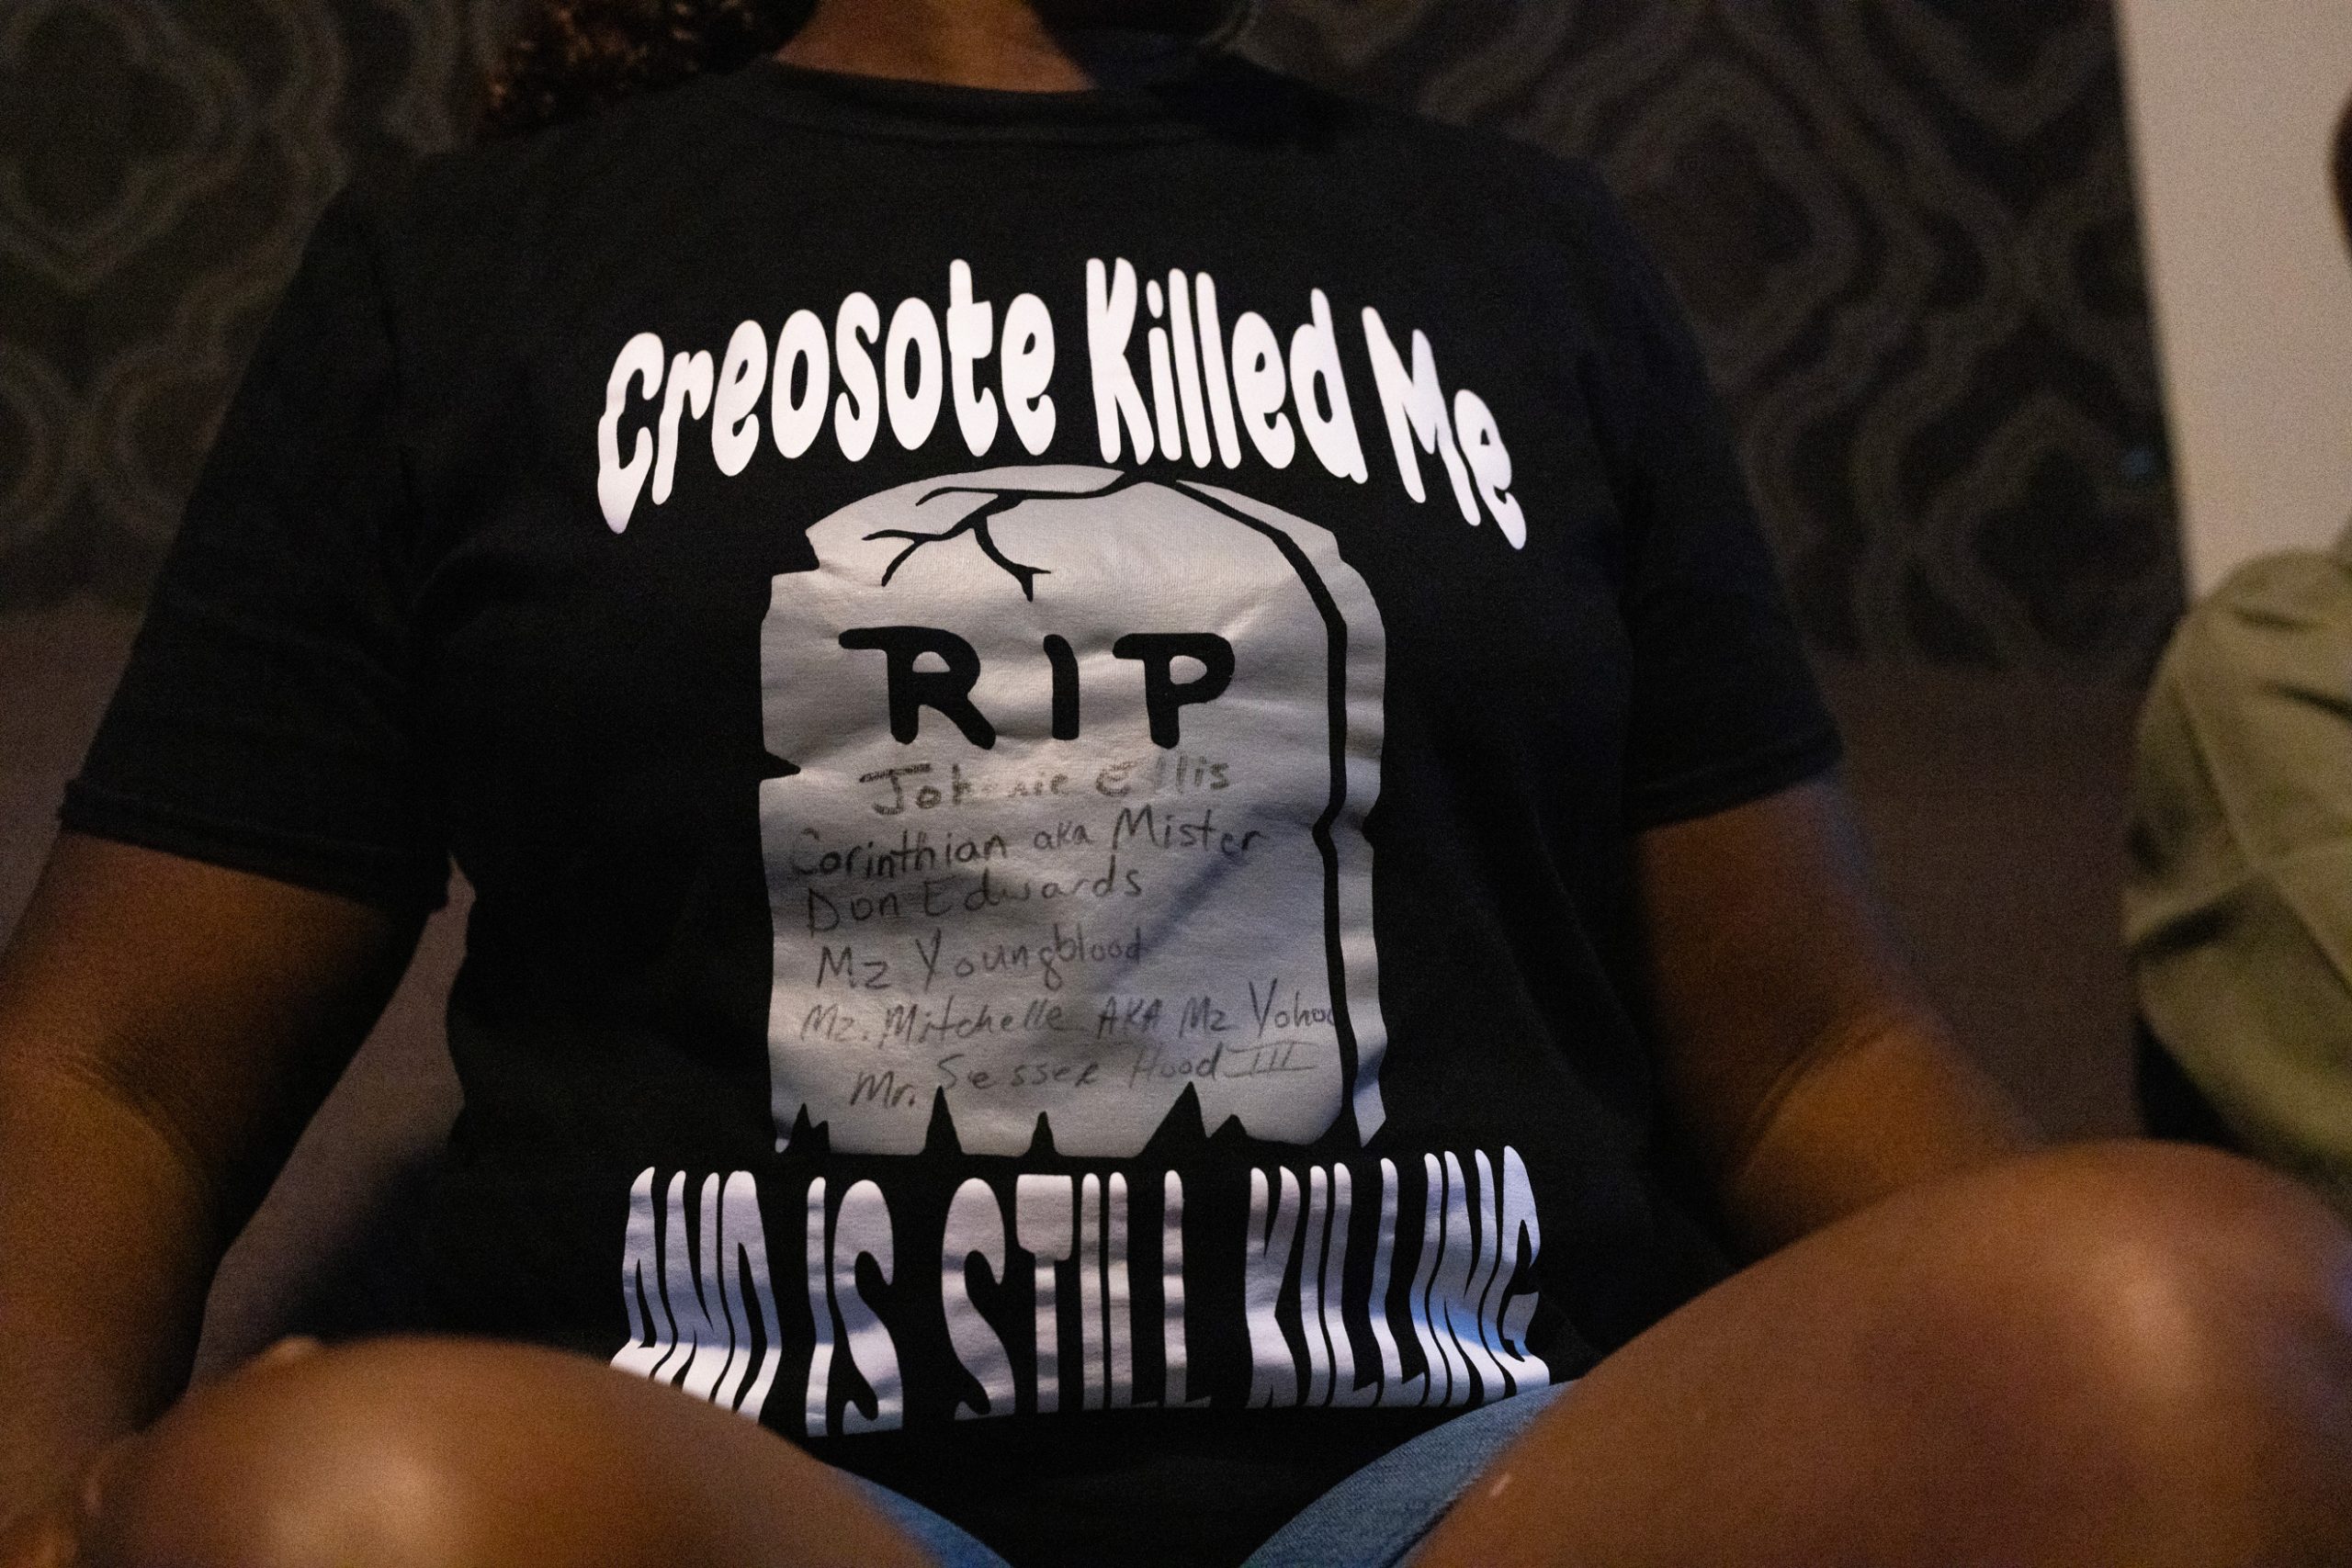 Sandra Edwards wears a shirt with “Creosote Killed Me” written on it as she gives an interview to ABC 13 about her reactions to a statement released by Union Pacific regarding contamination in Houston's Fifth Ward.